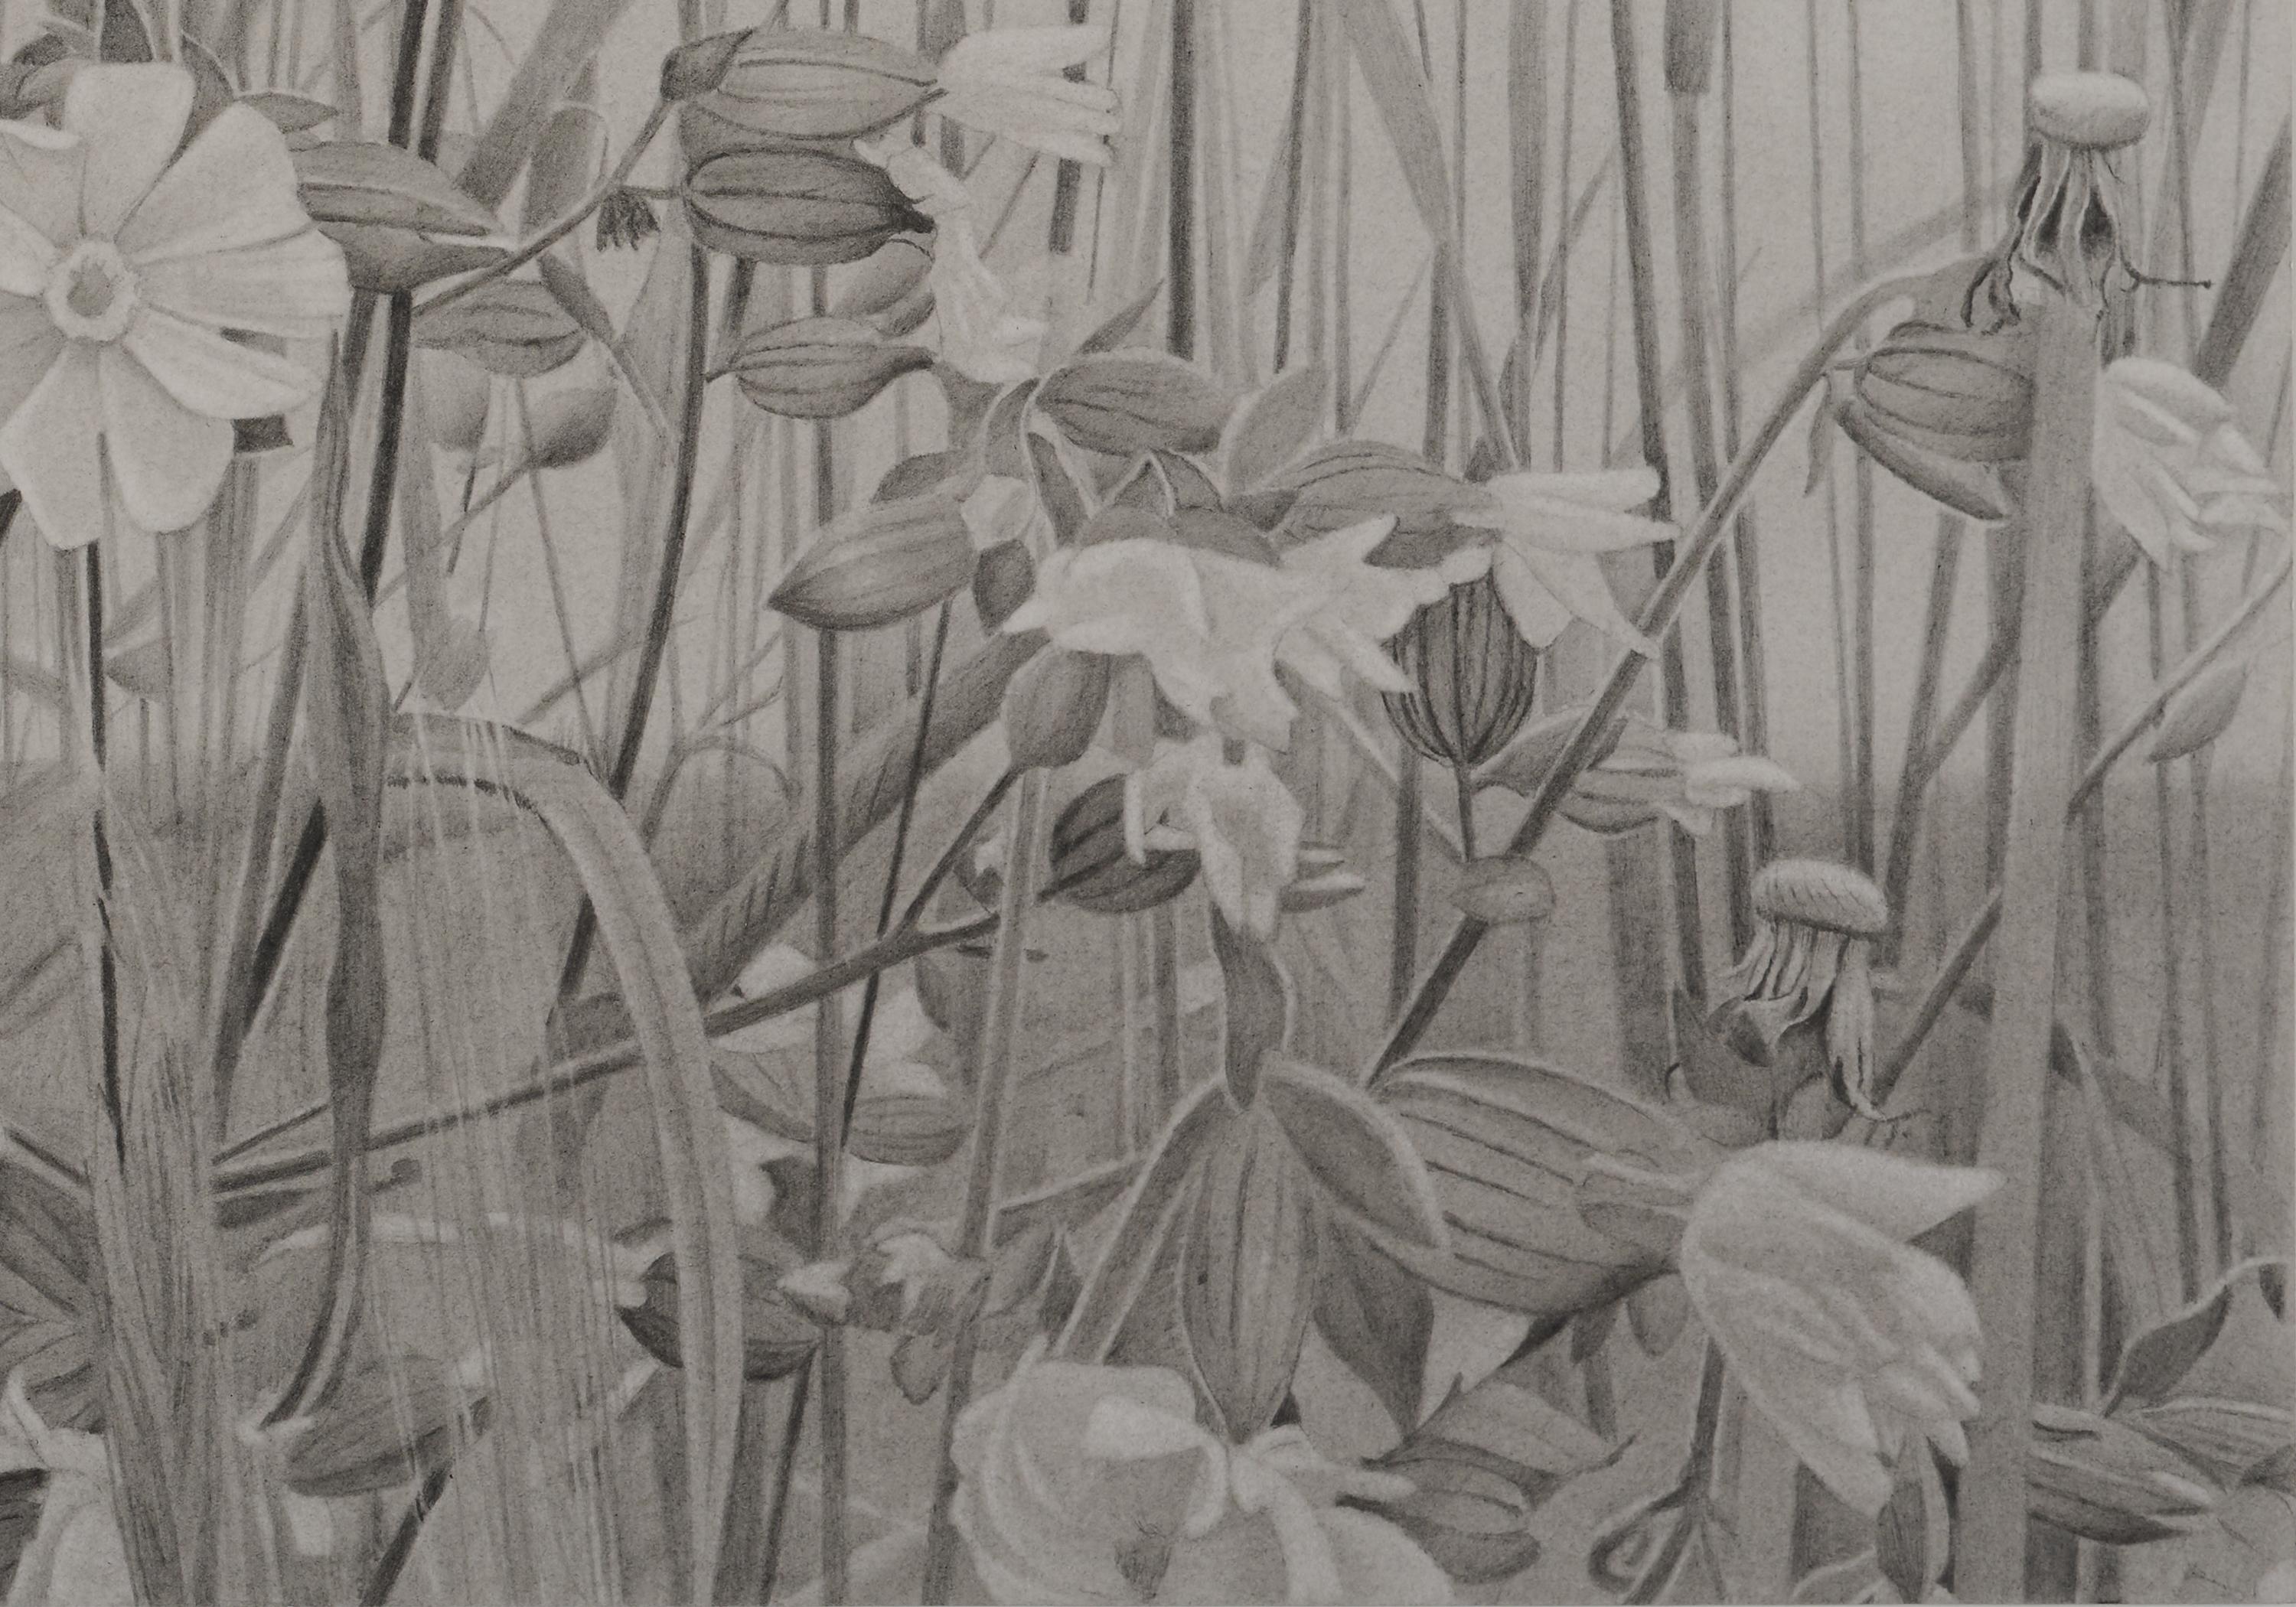 Wildflowers and Sky, Vermont Landscape Black & White Graphite Drawing - Art by Mary Reilly